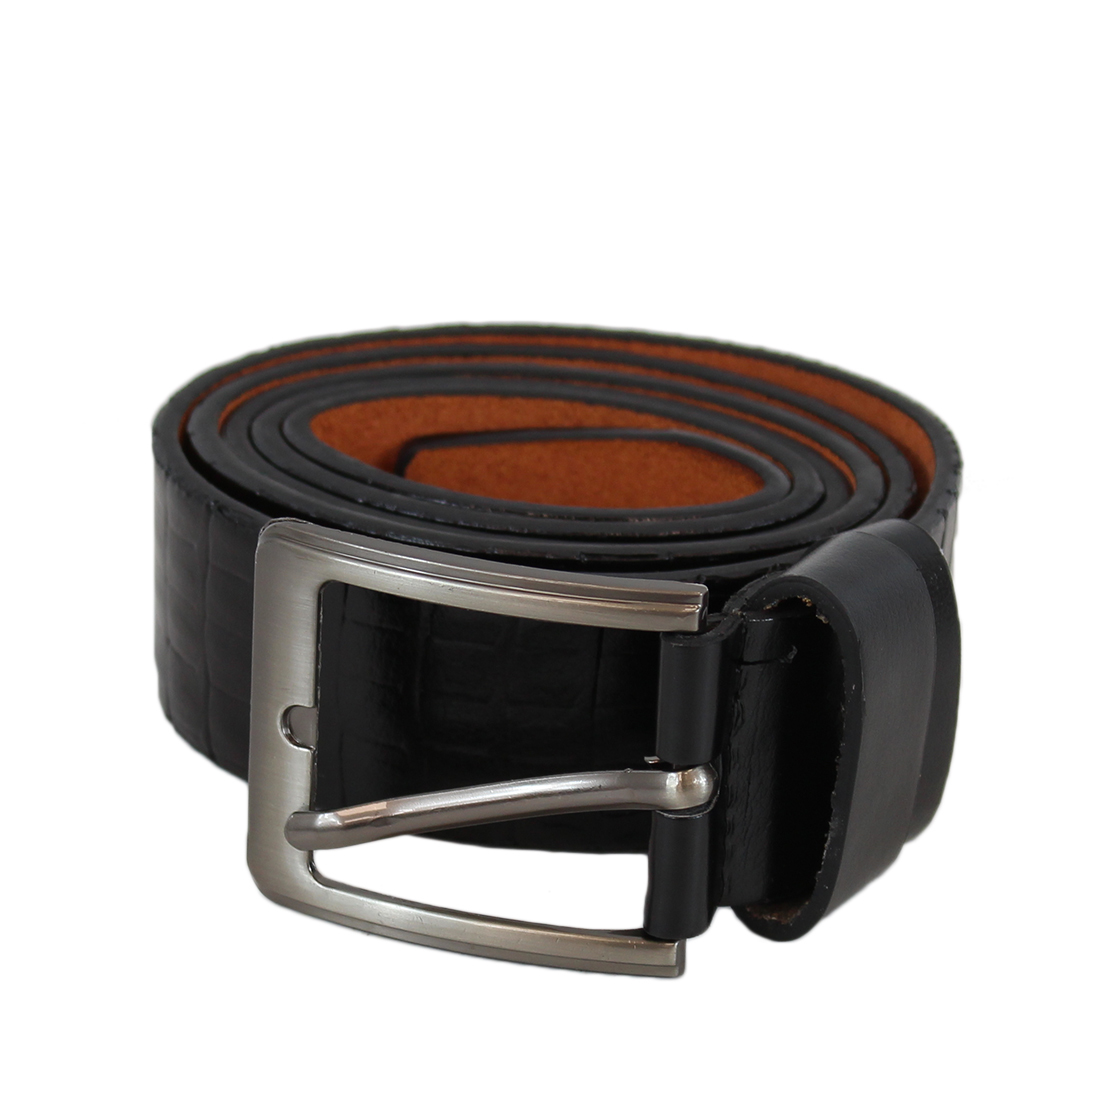 Plain shiny wide leather belt with silver buckle